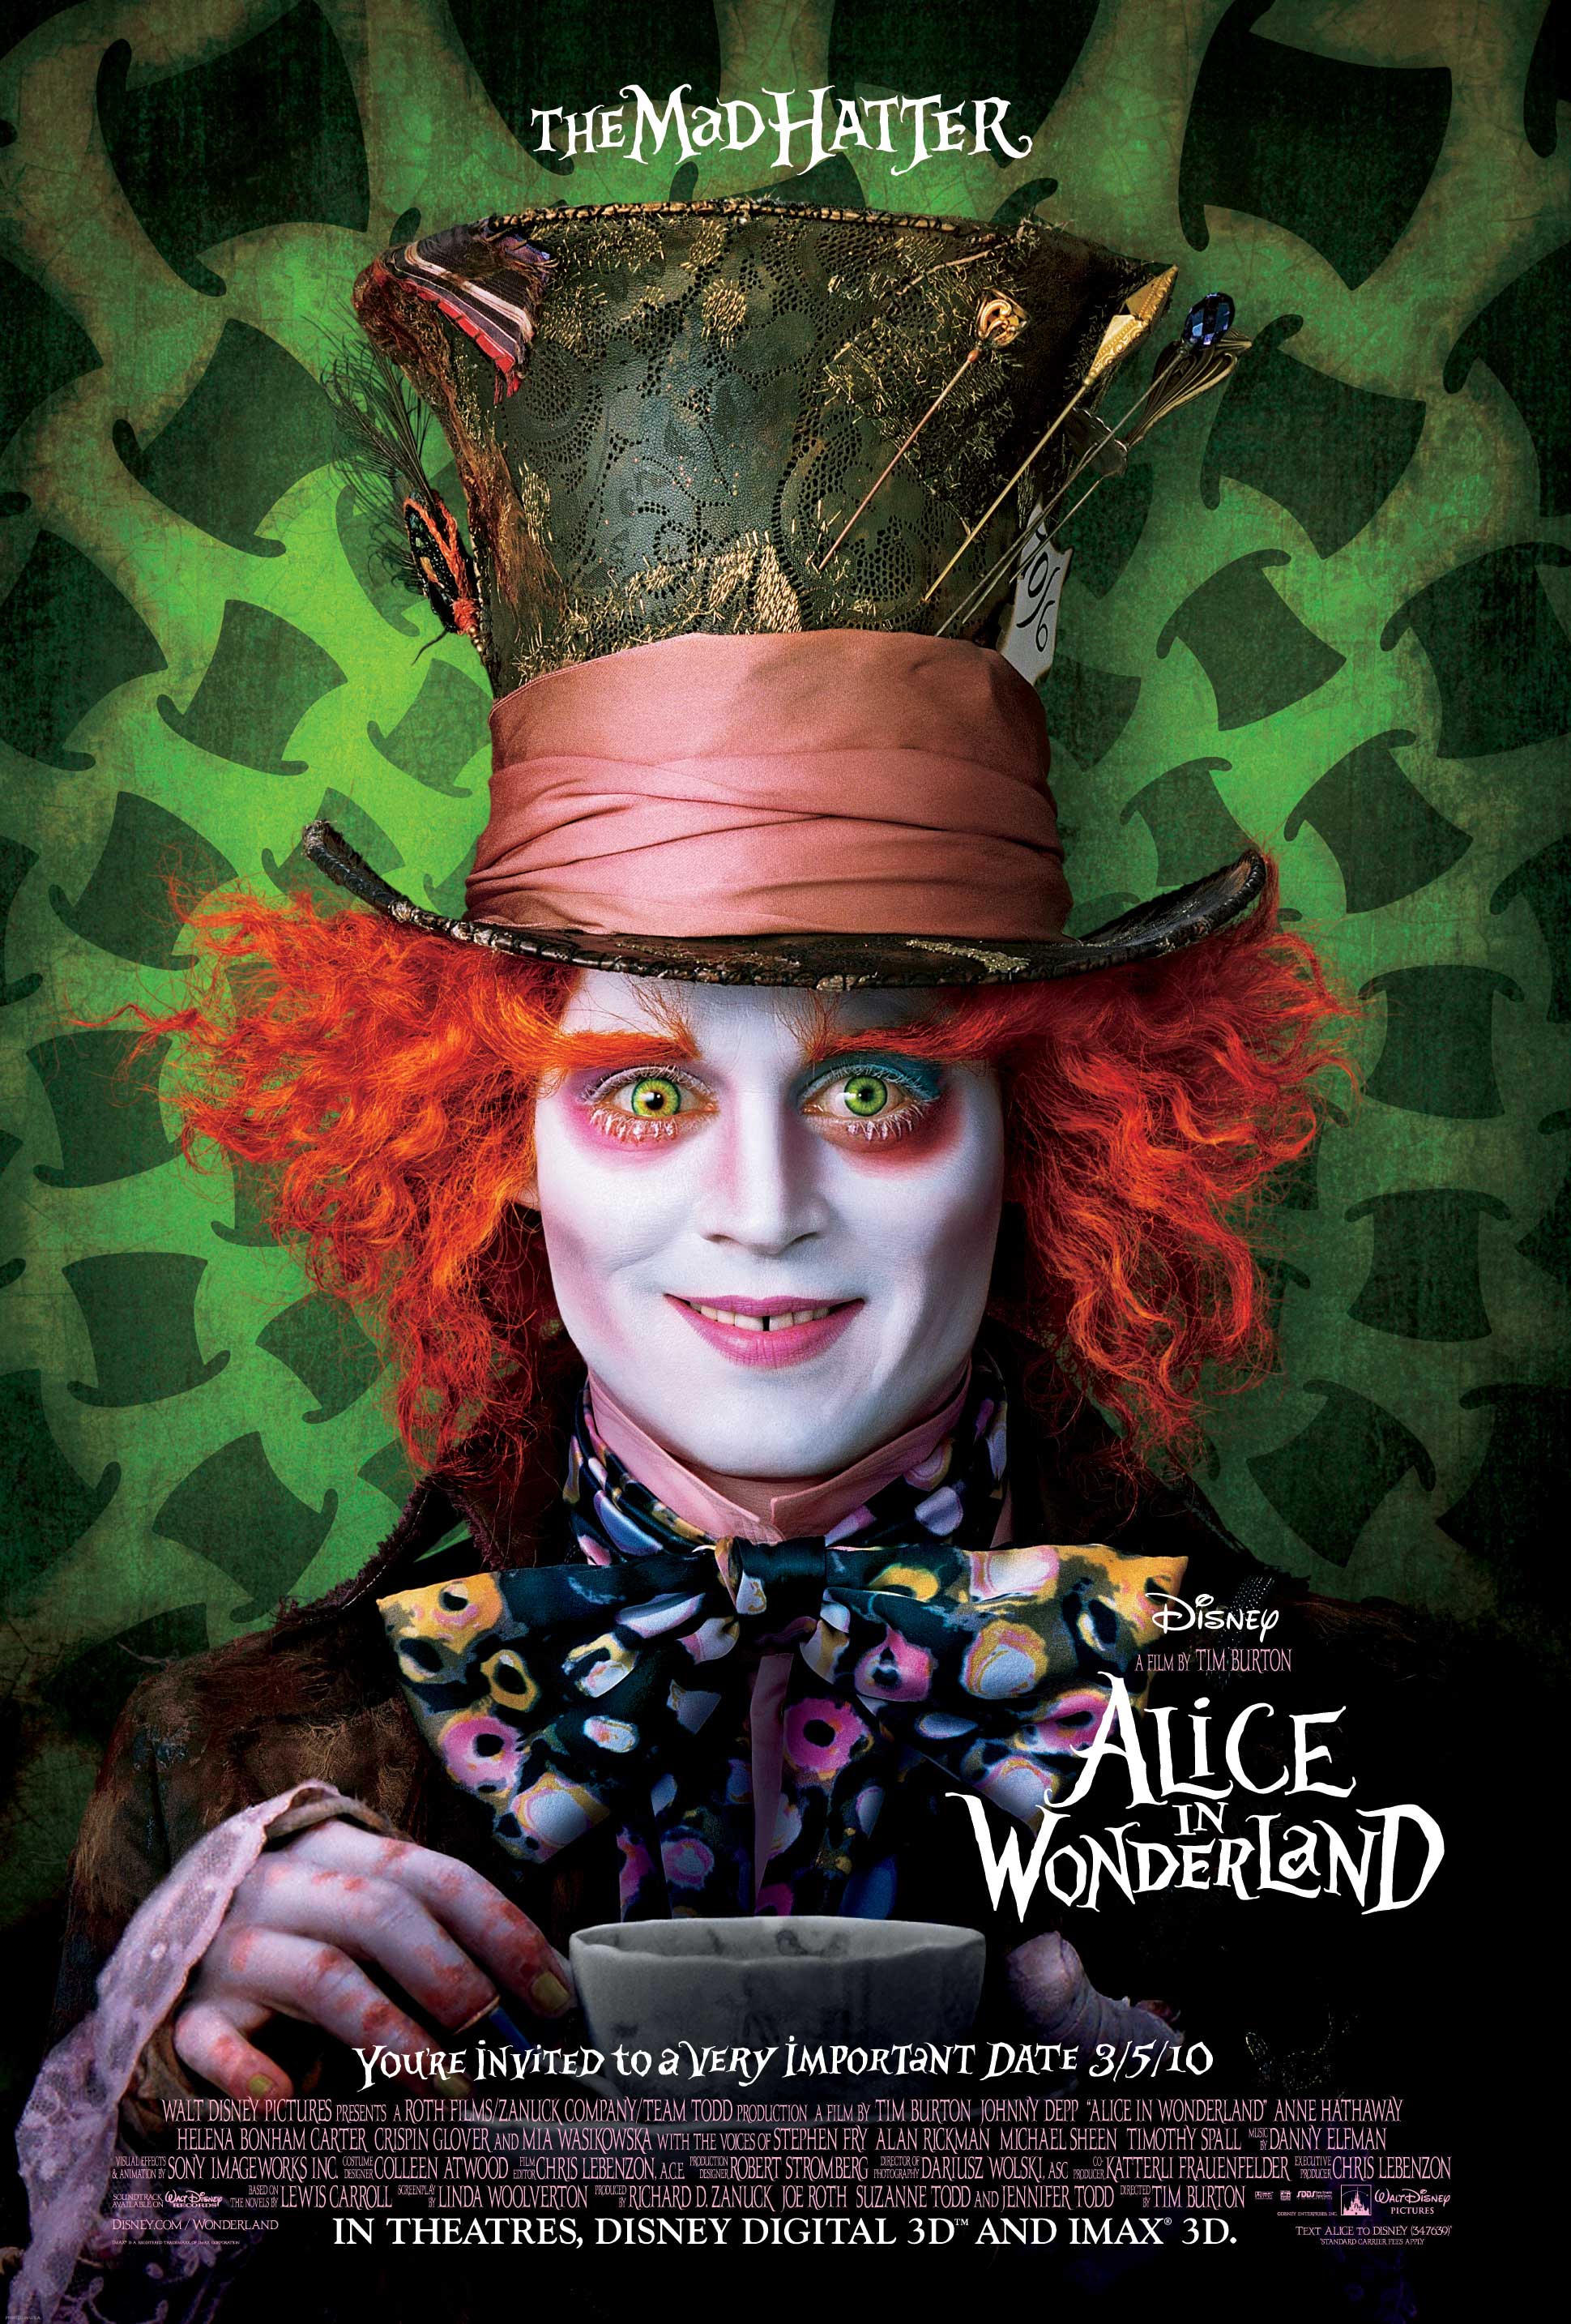 Wonderland Johnny Depp As The Mad Hatter iPad Wallpaper Car Pictures